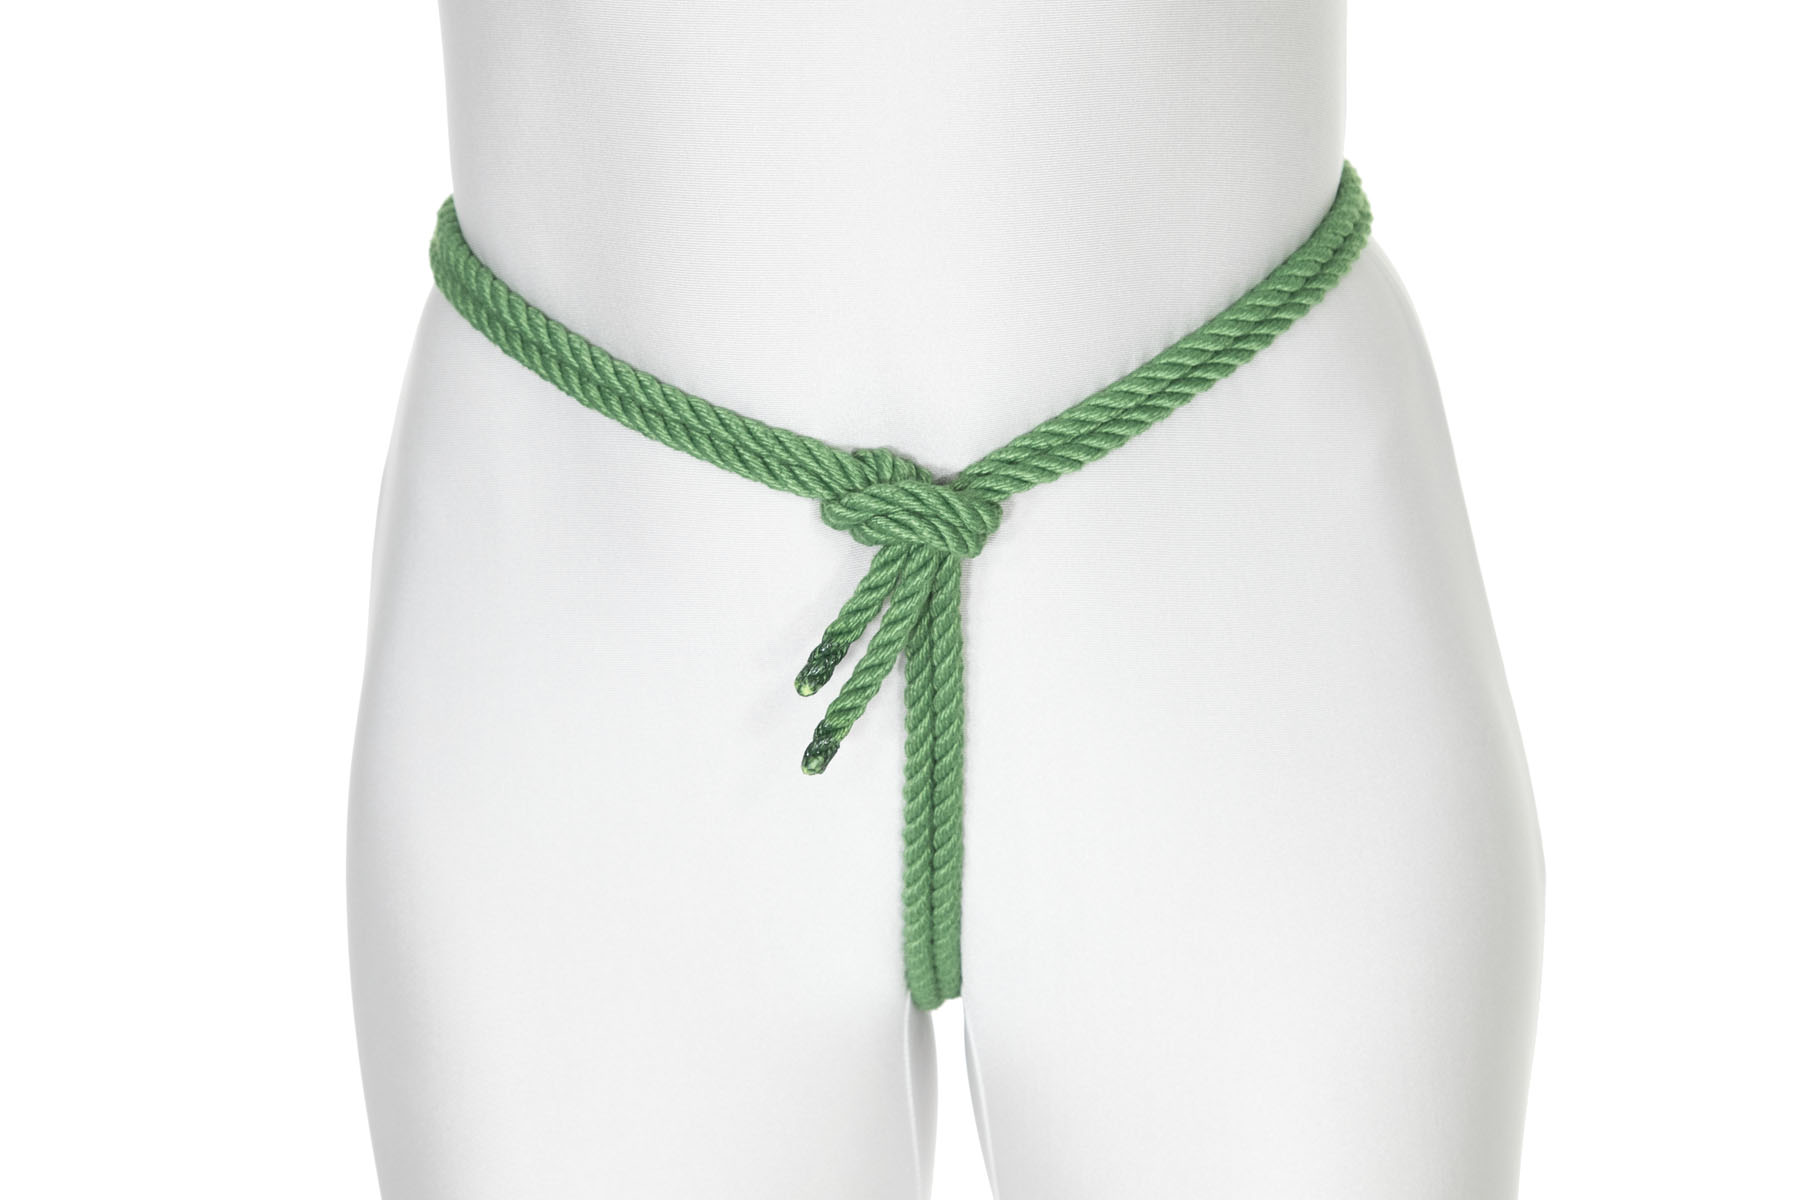 A green rope comes between a person’s legs and up their crotch to their waist. The rope turns to the right and goes all the way around the waist. When it gets back to the right hand turn, it crosses under itself and makes a half hitch knot.